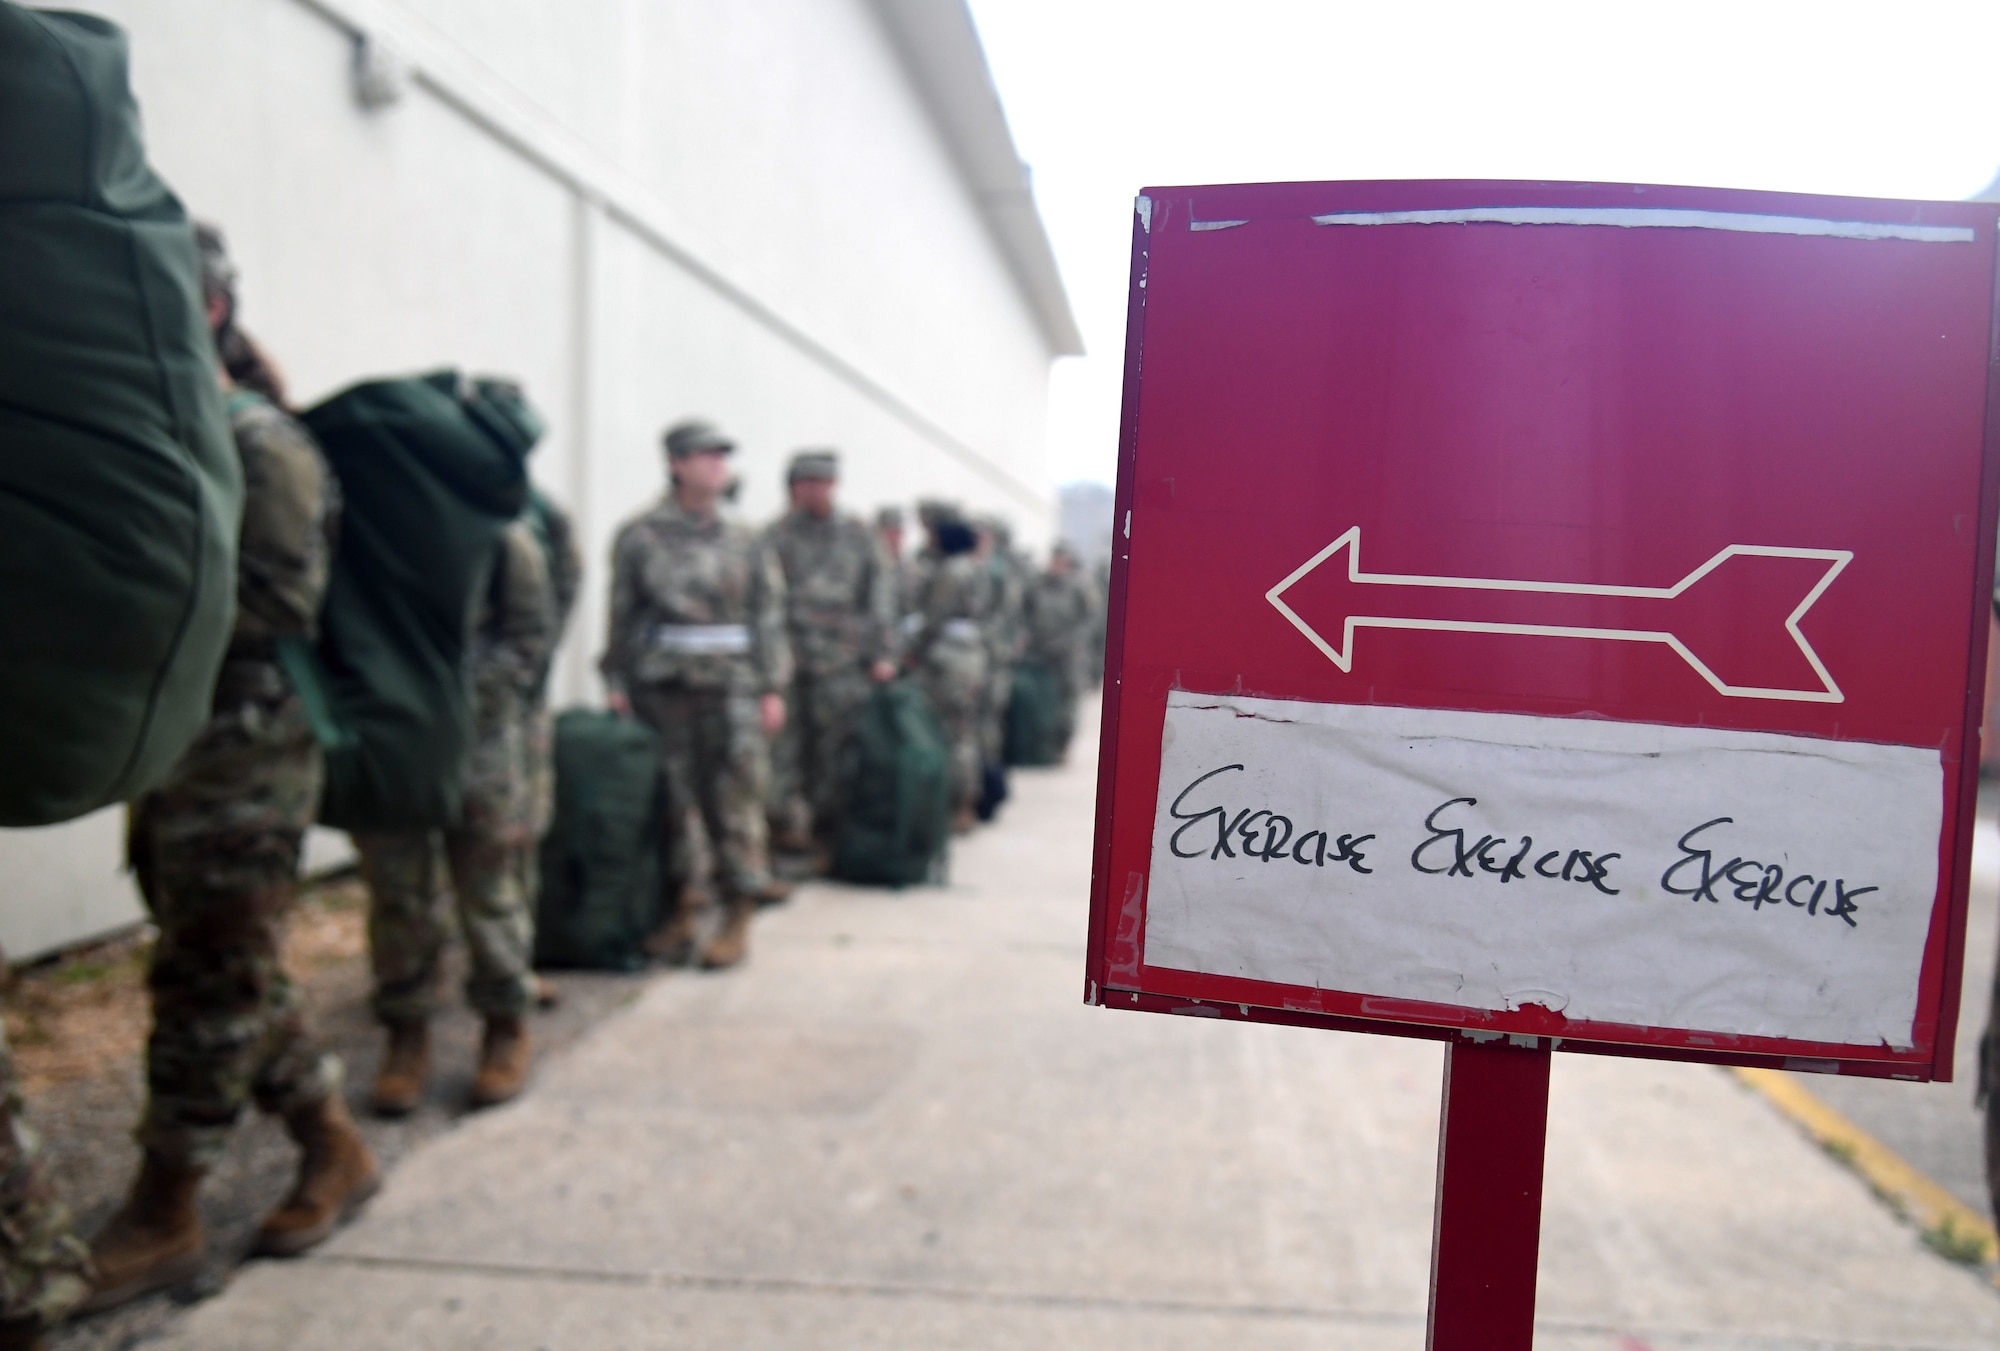 Airmen from the 81st Training Group line up outside of Allee Hall for shelter in-processing during a hurricane exercise at Keesler Air Force Base, Mississippi, April 29, 2022. Keesler personnel participate in exercise scenarios in preparation for hurricane season. (U.S. Air Force photo by Kemberly Groue)